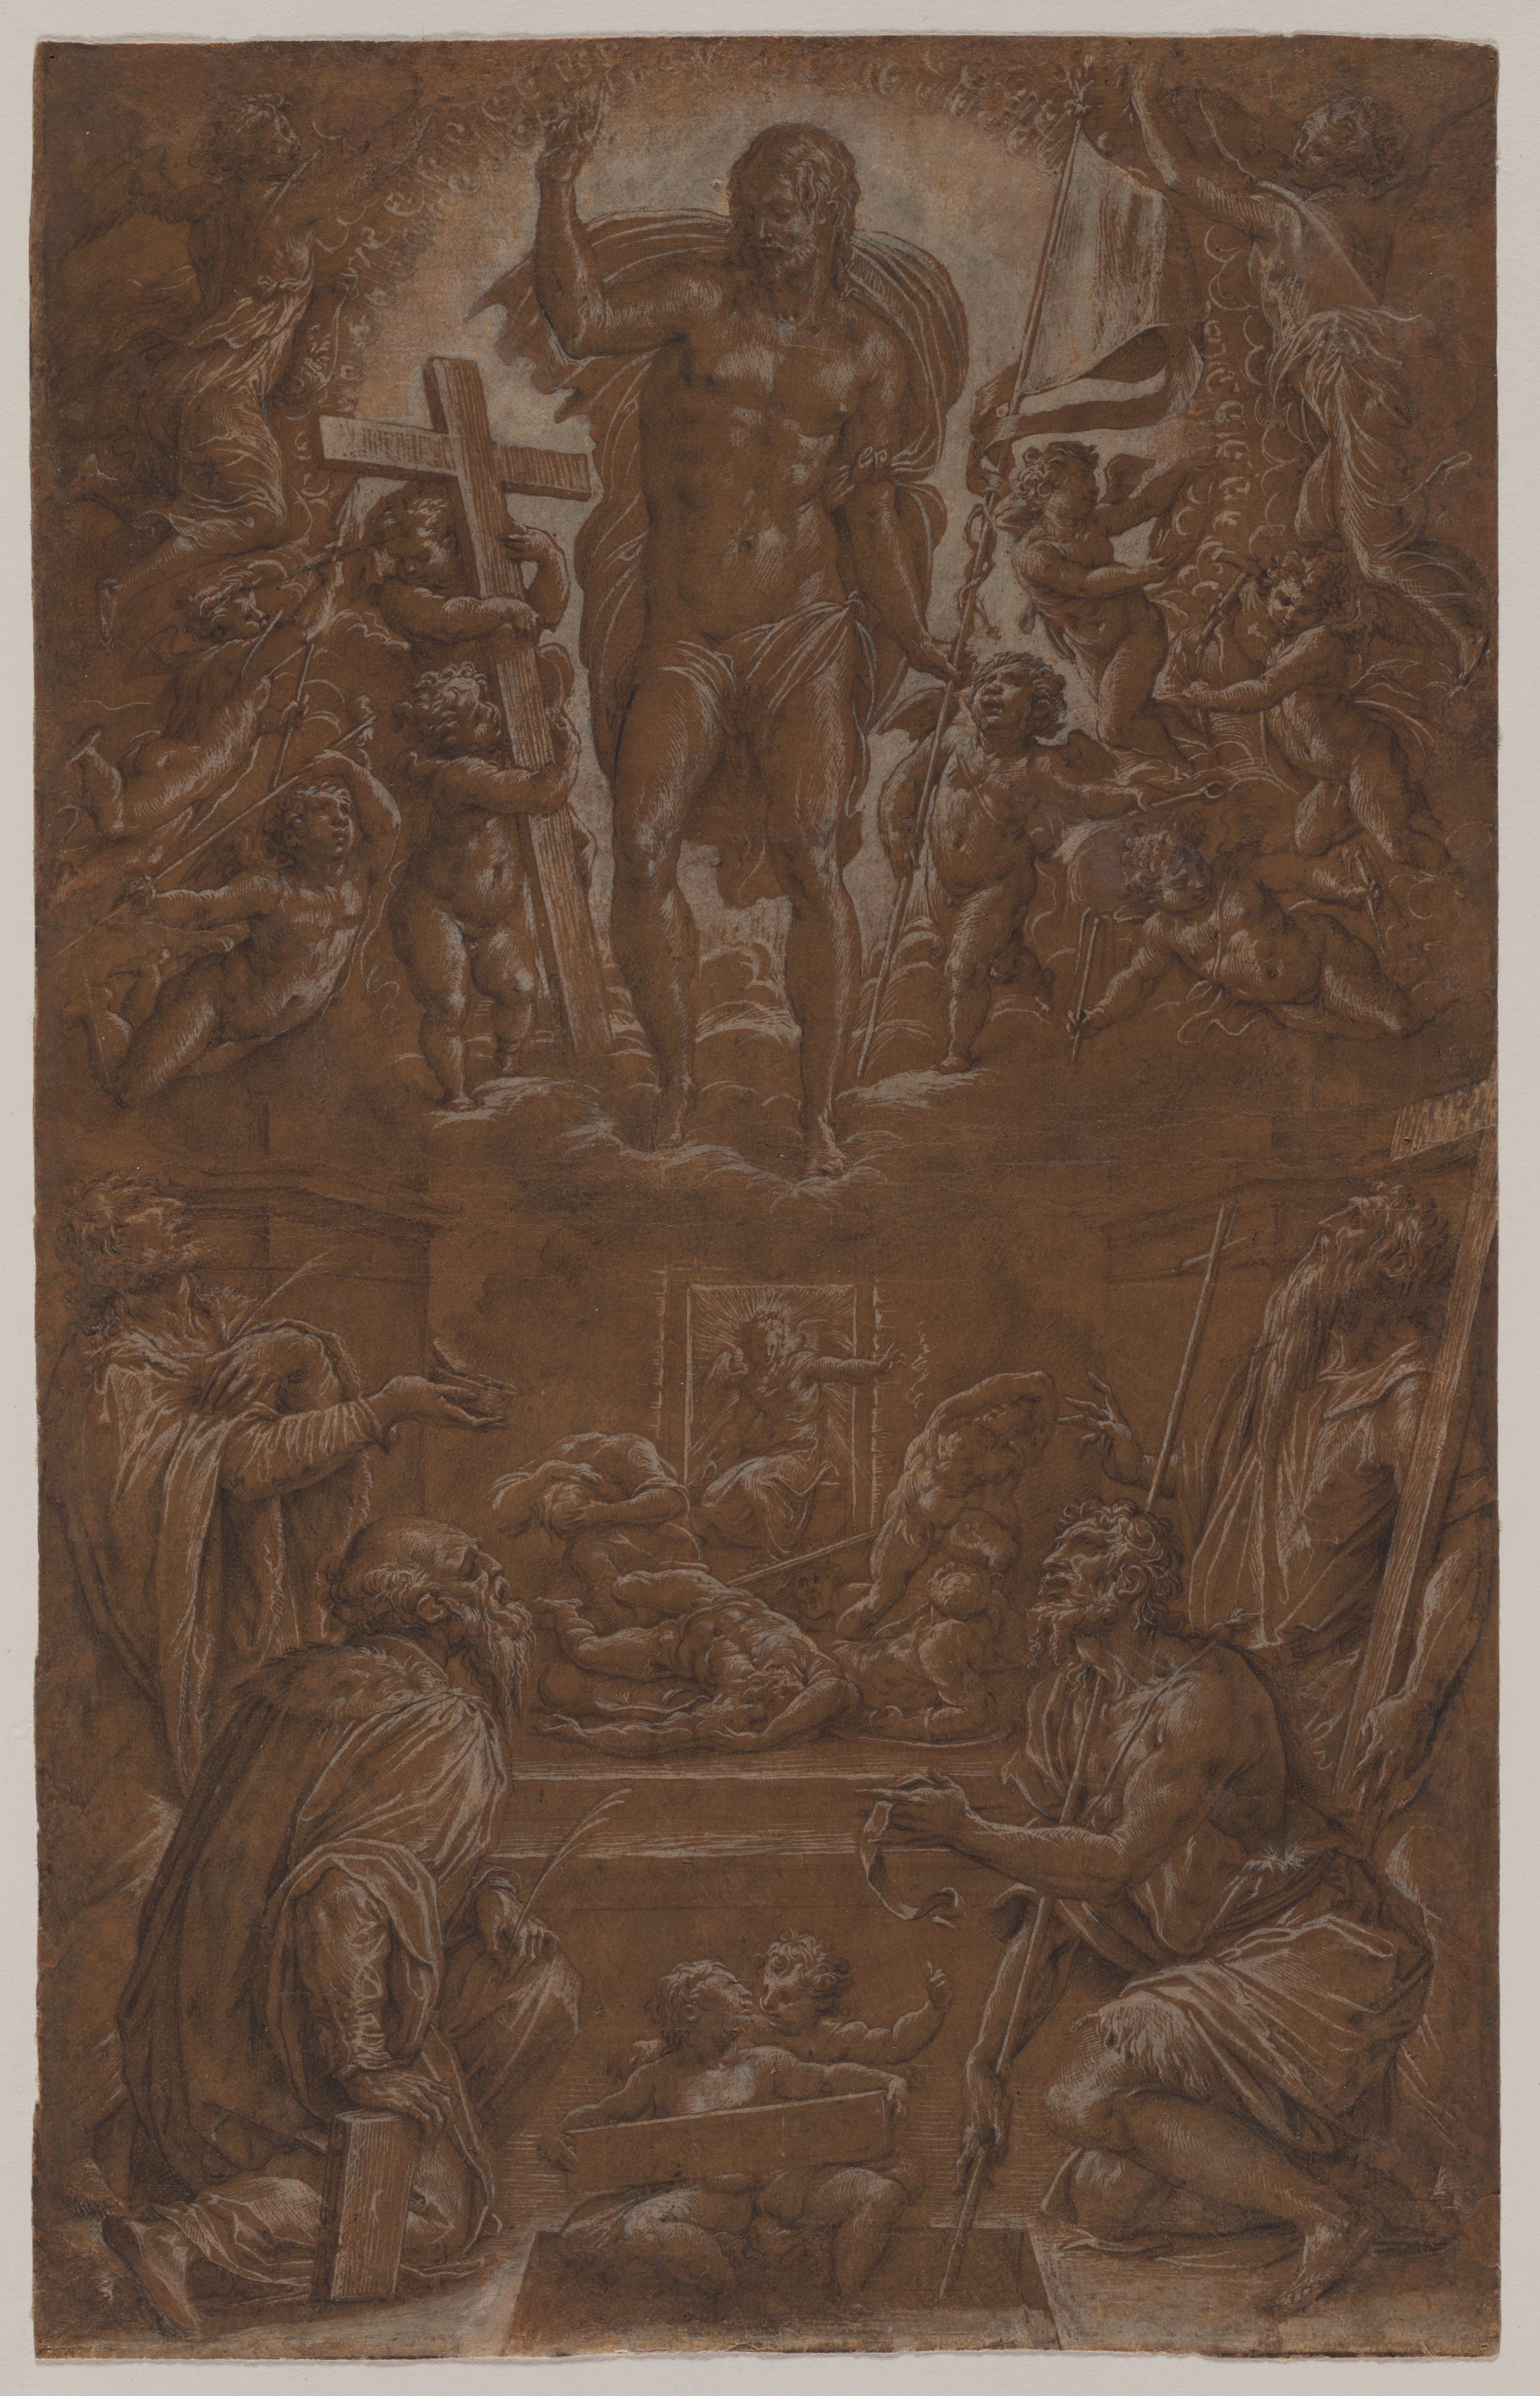 The Risen Christ Adored by Saints and Angels